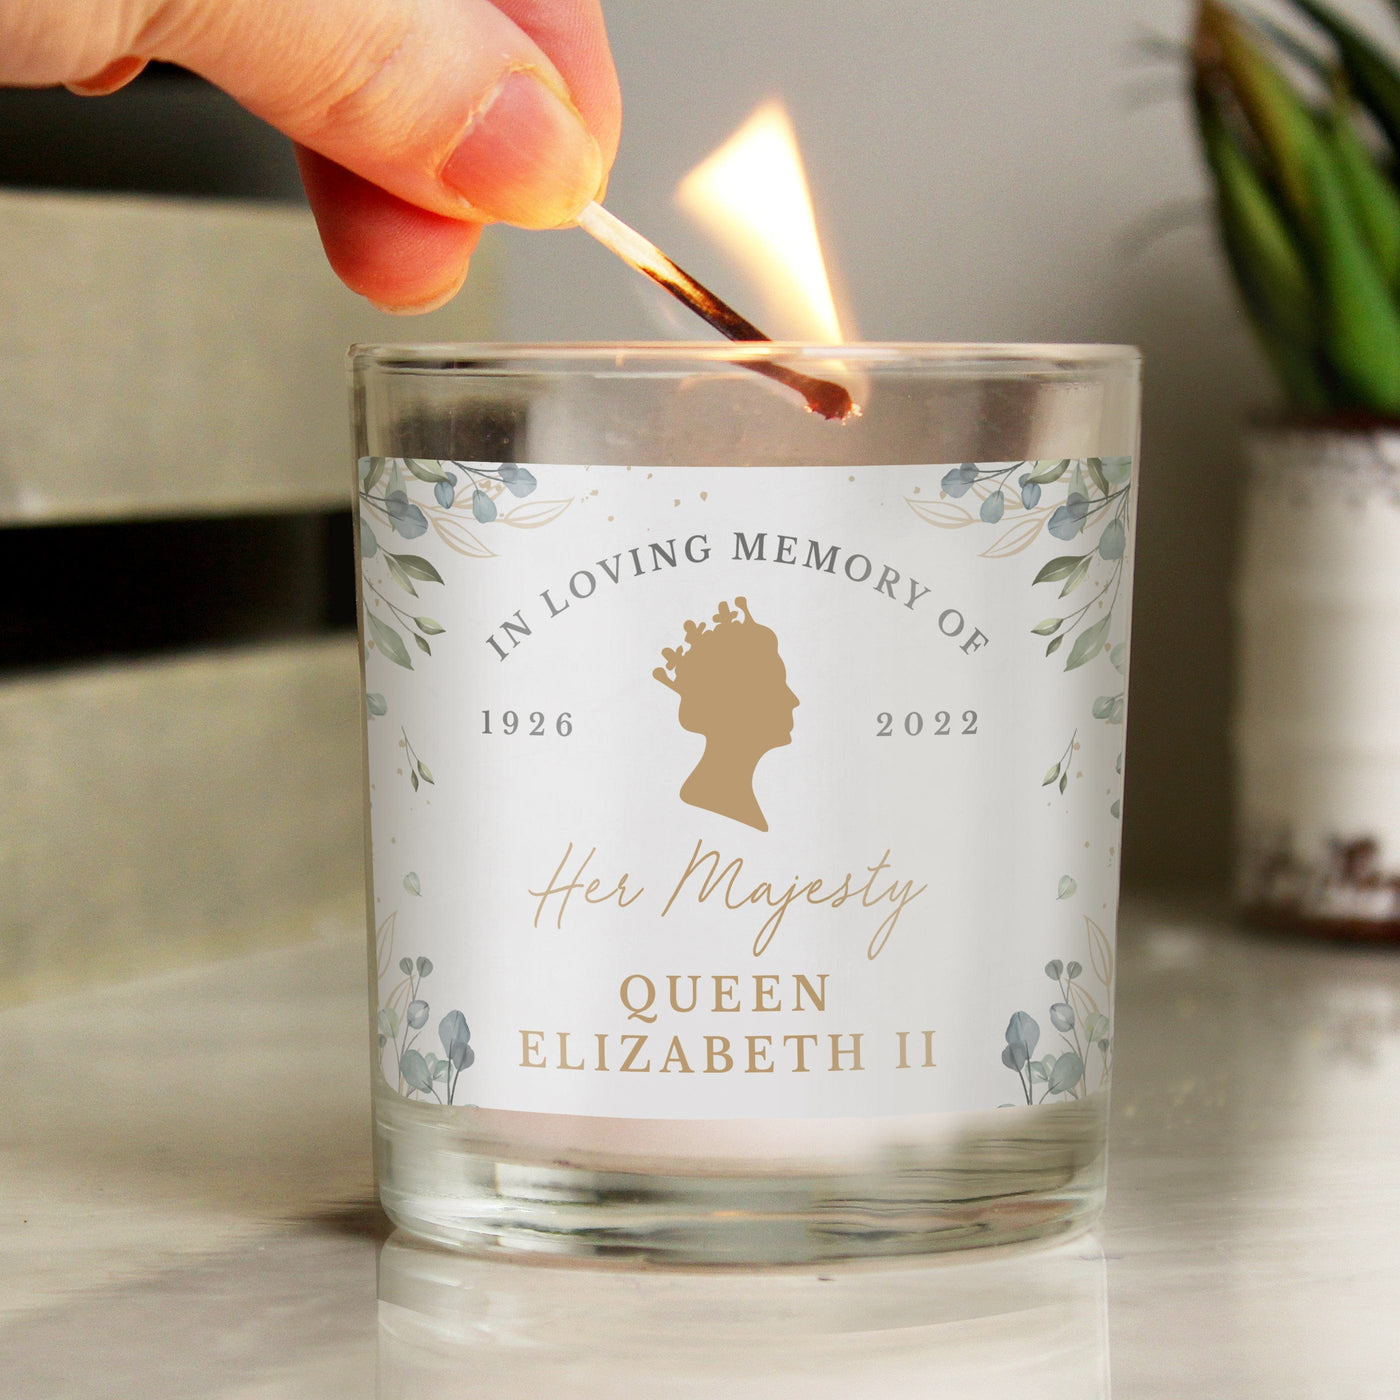 Something Different Tealight Holders, Candles Queen Elizabeth II In Loving Memory Vanilla Scented Candle